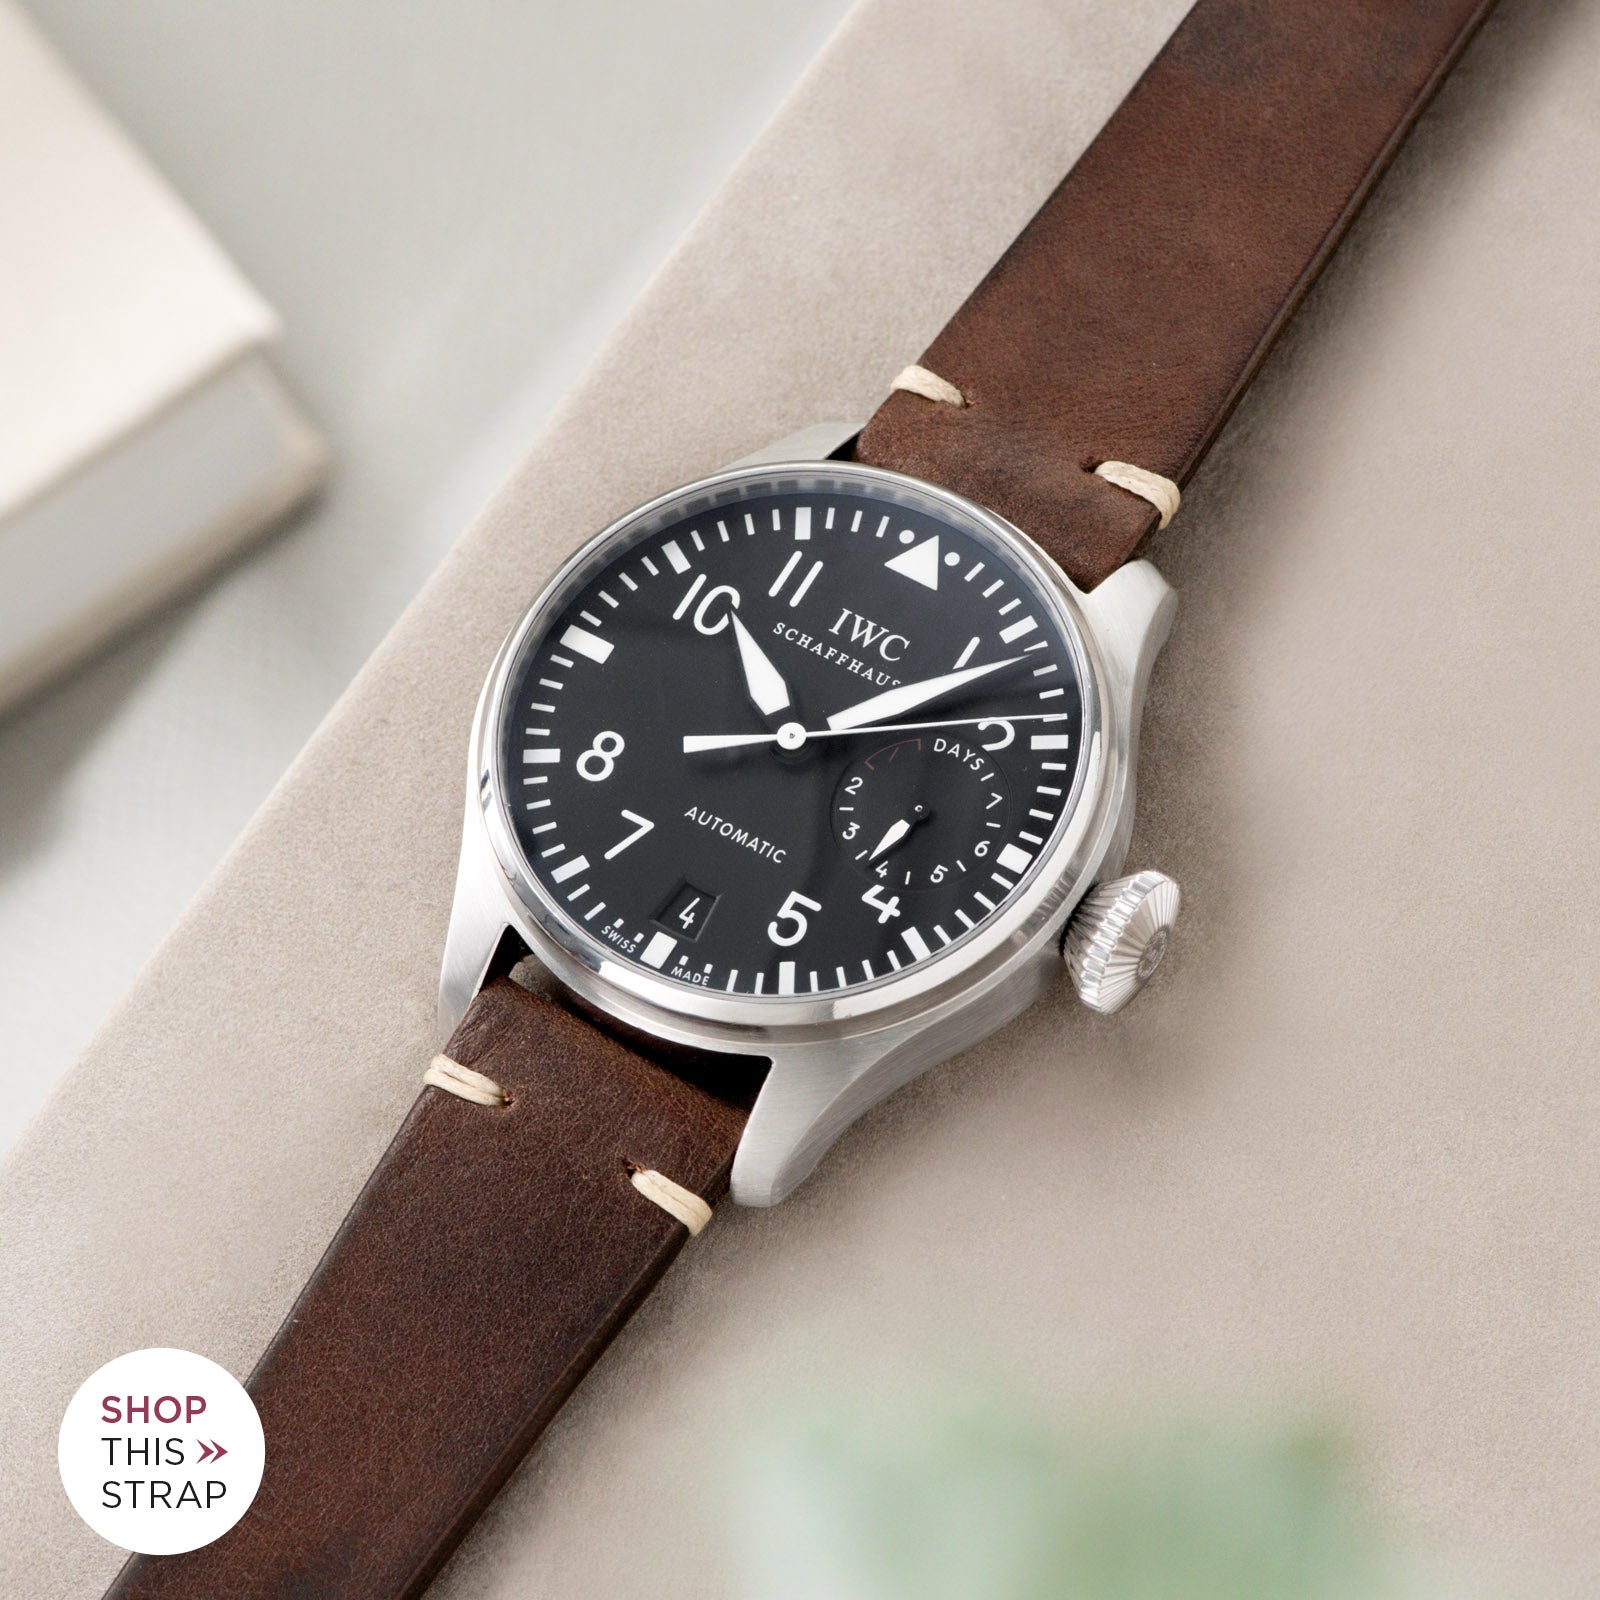 Bulang and Sons_Strap Guide_IWC Big Pilot Ref 5004_Lumberjack Brown Leather Watch Strap